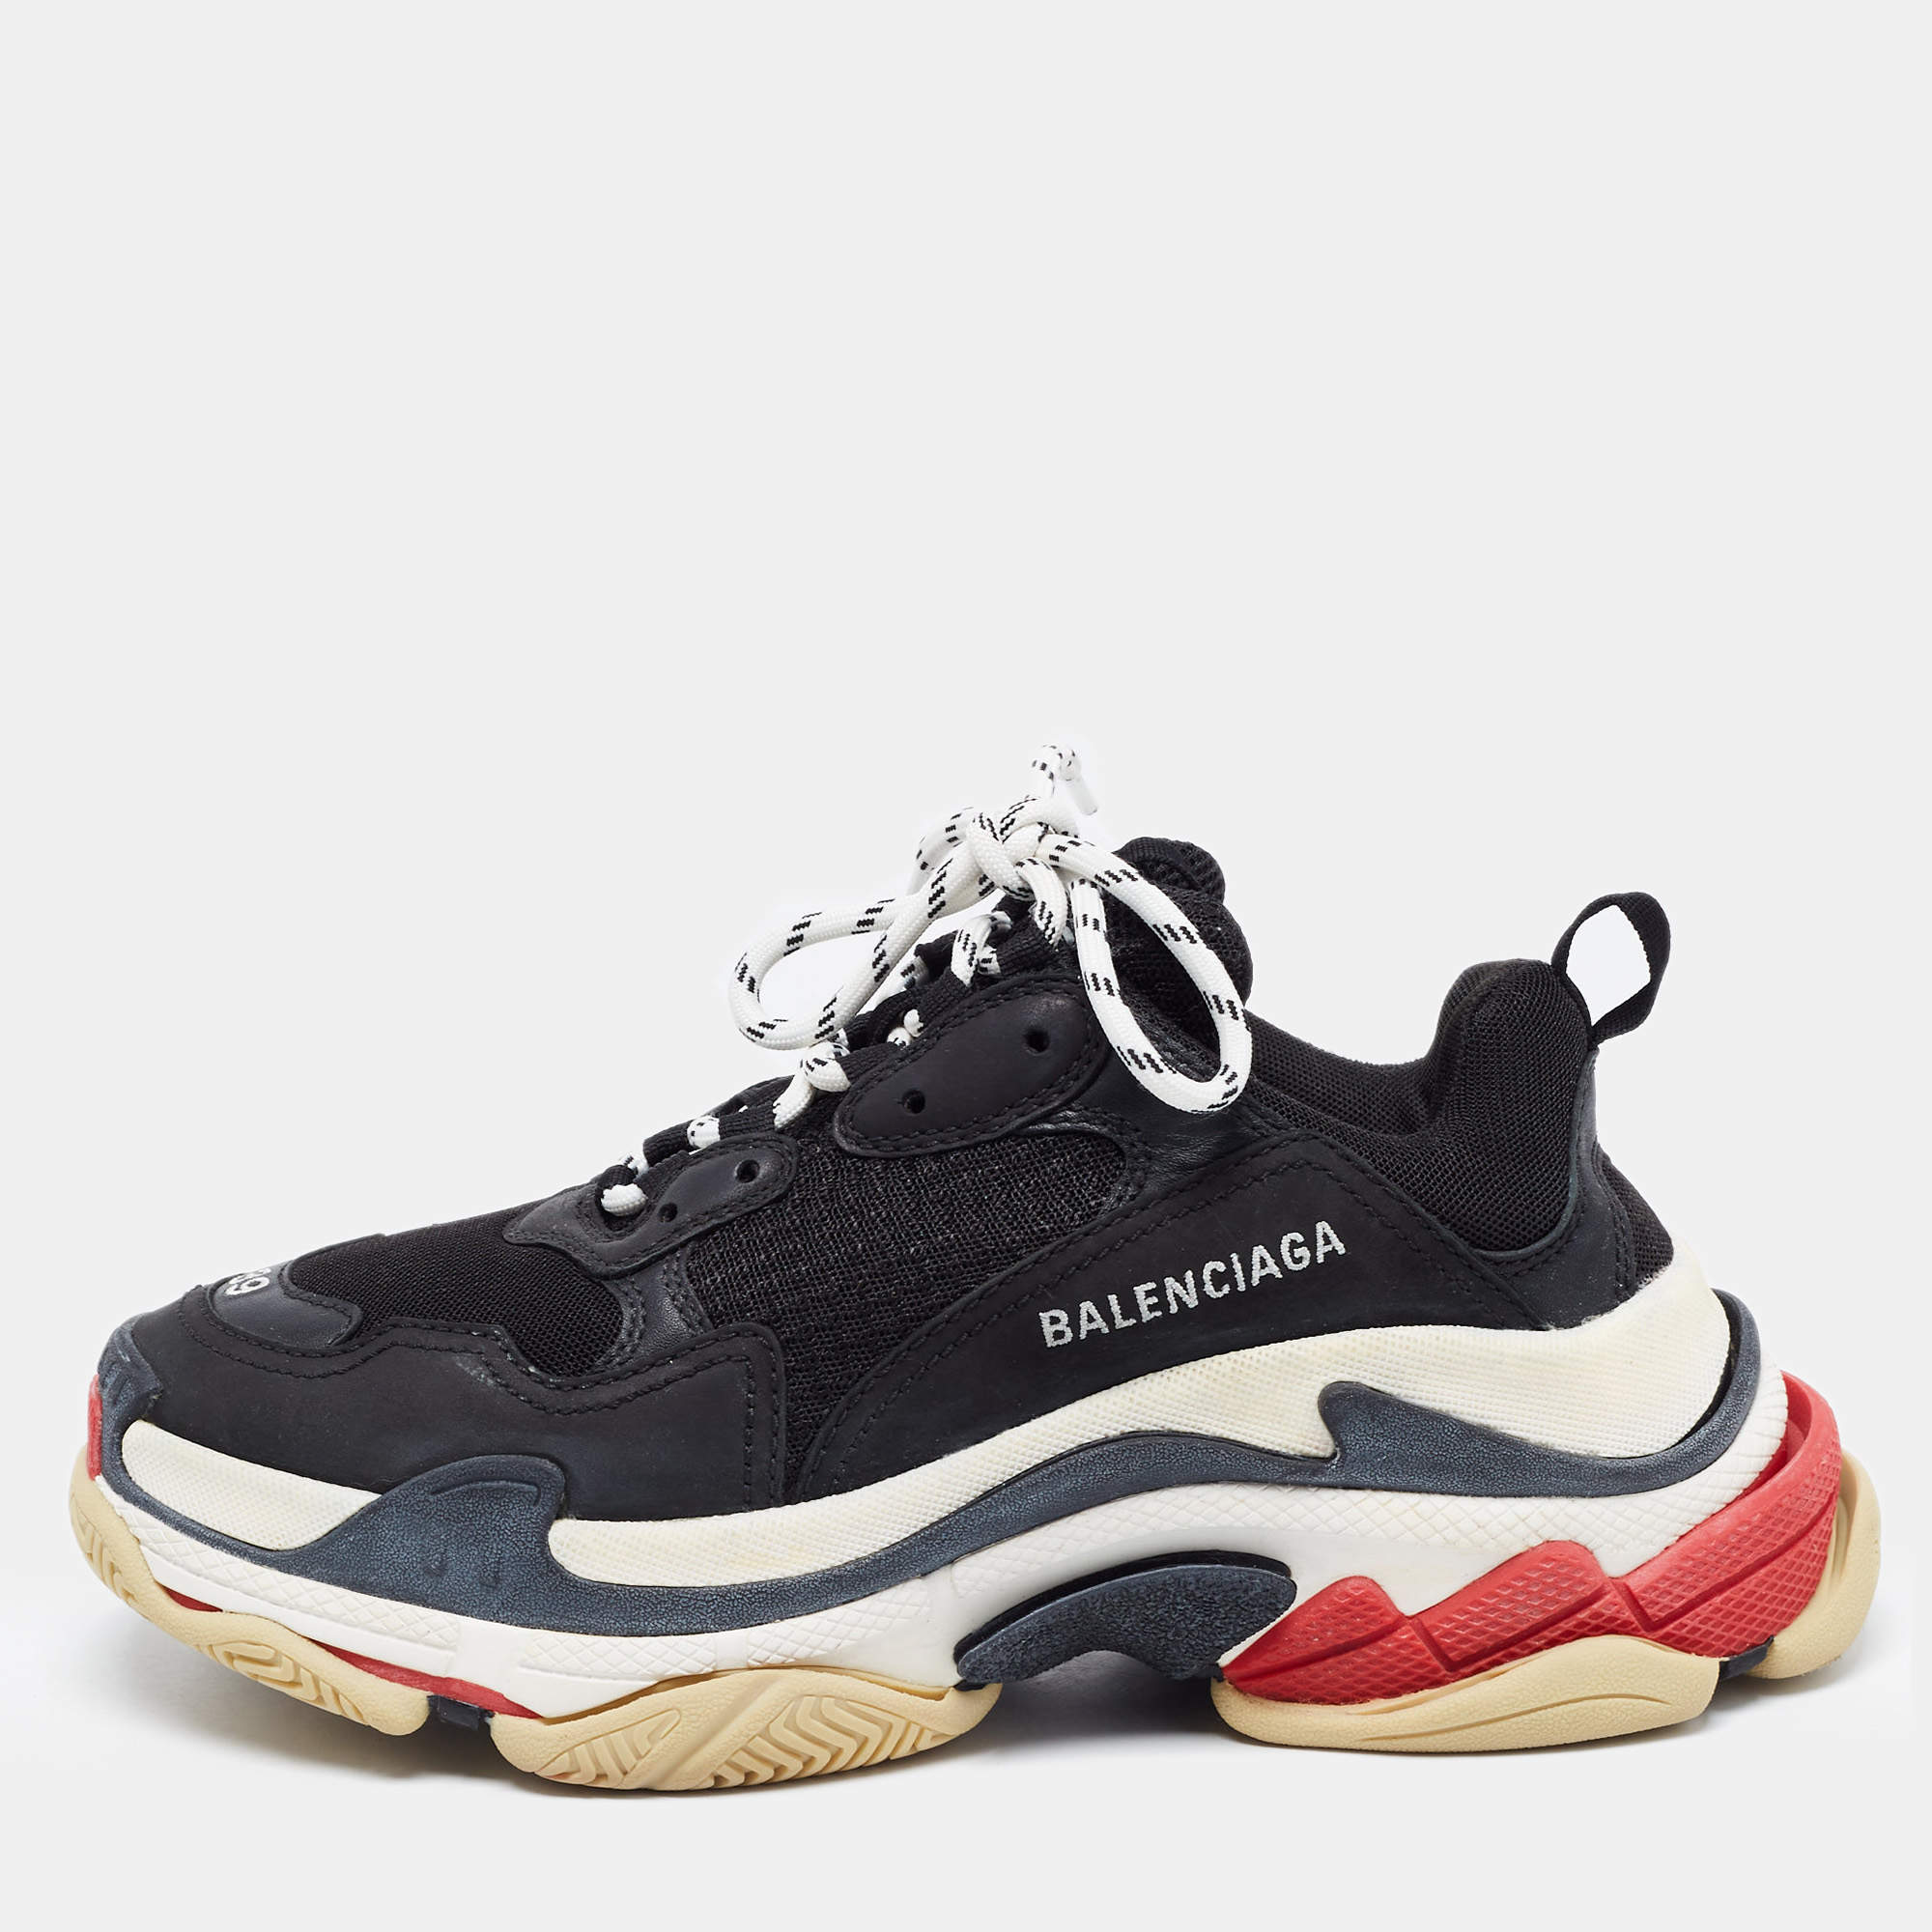 Yall Wanna C These?? All Red Triple S Balenciaga Shoes 